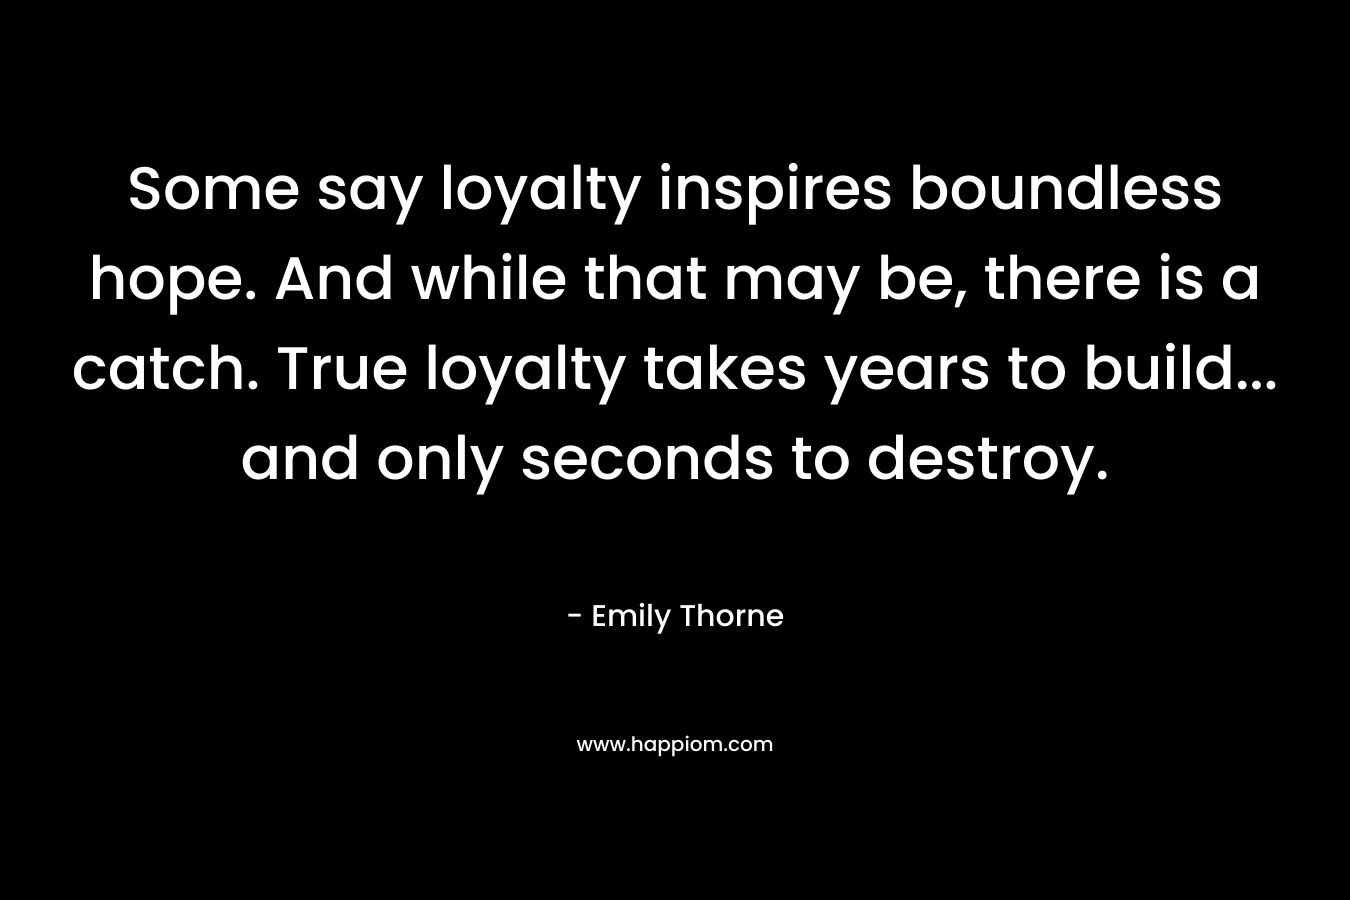 Some say loyalty inspires boundless hope. And while that may be, there is a catch. True loyalty takes years to build... and only seconds to destroy.